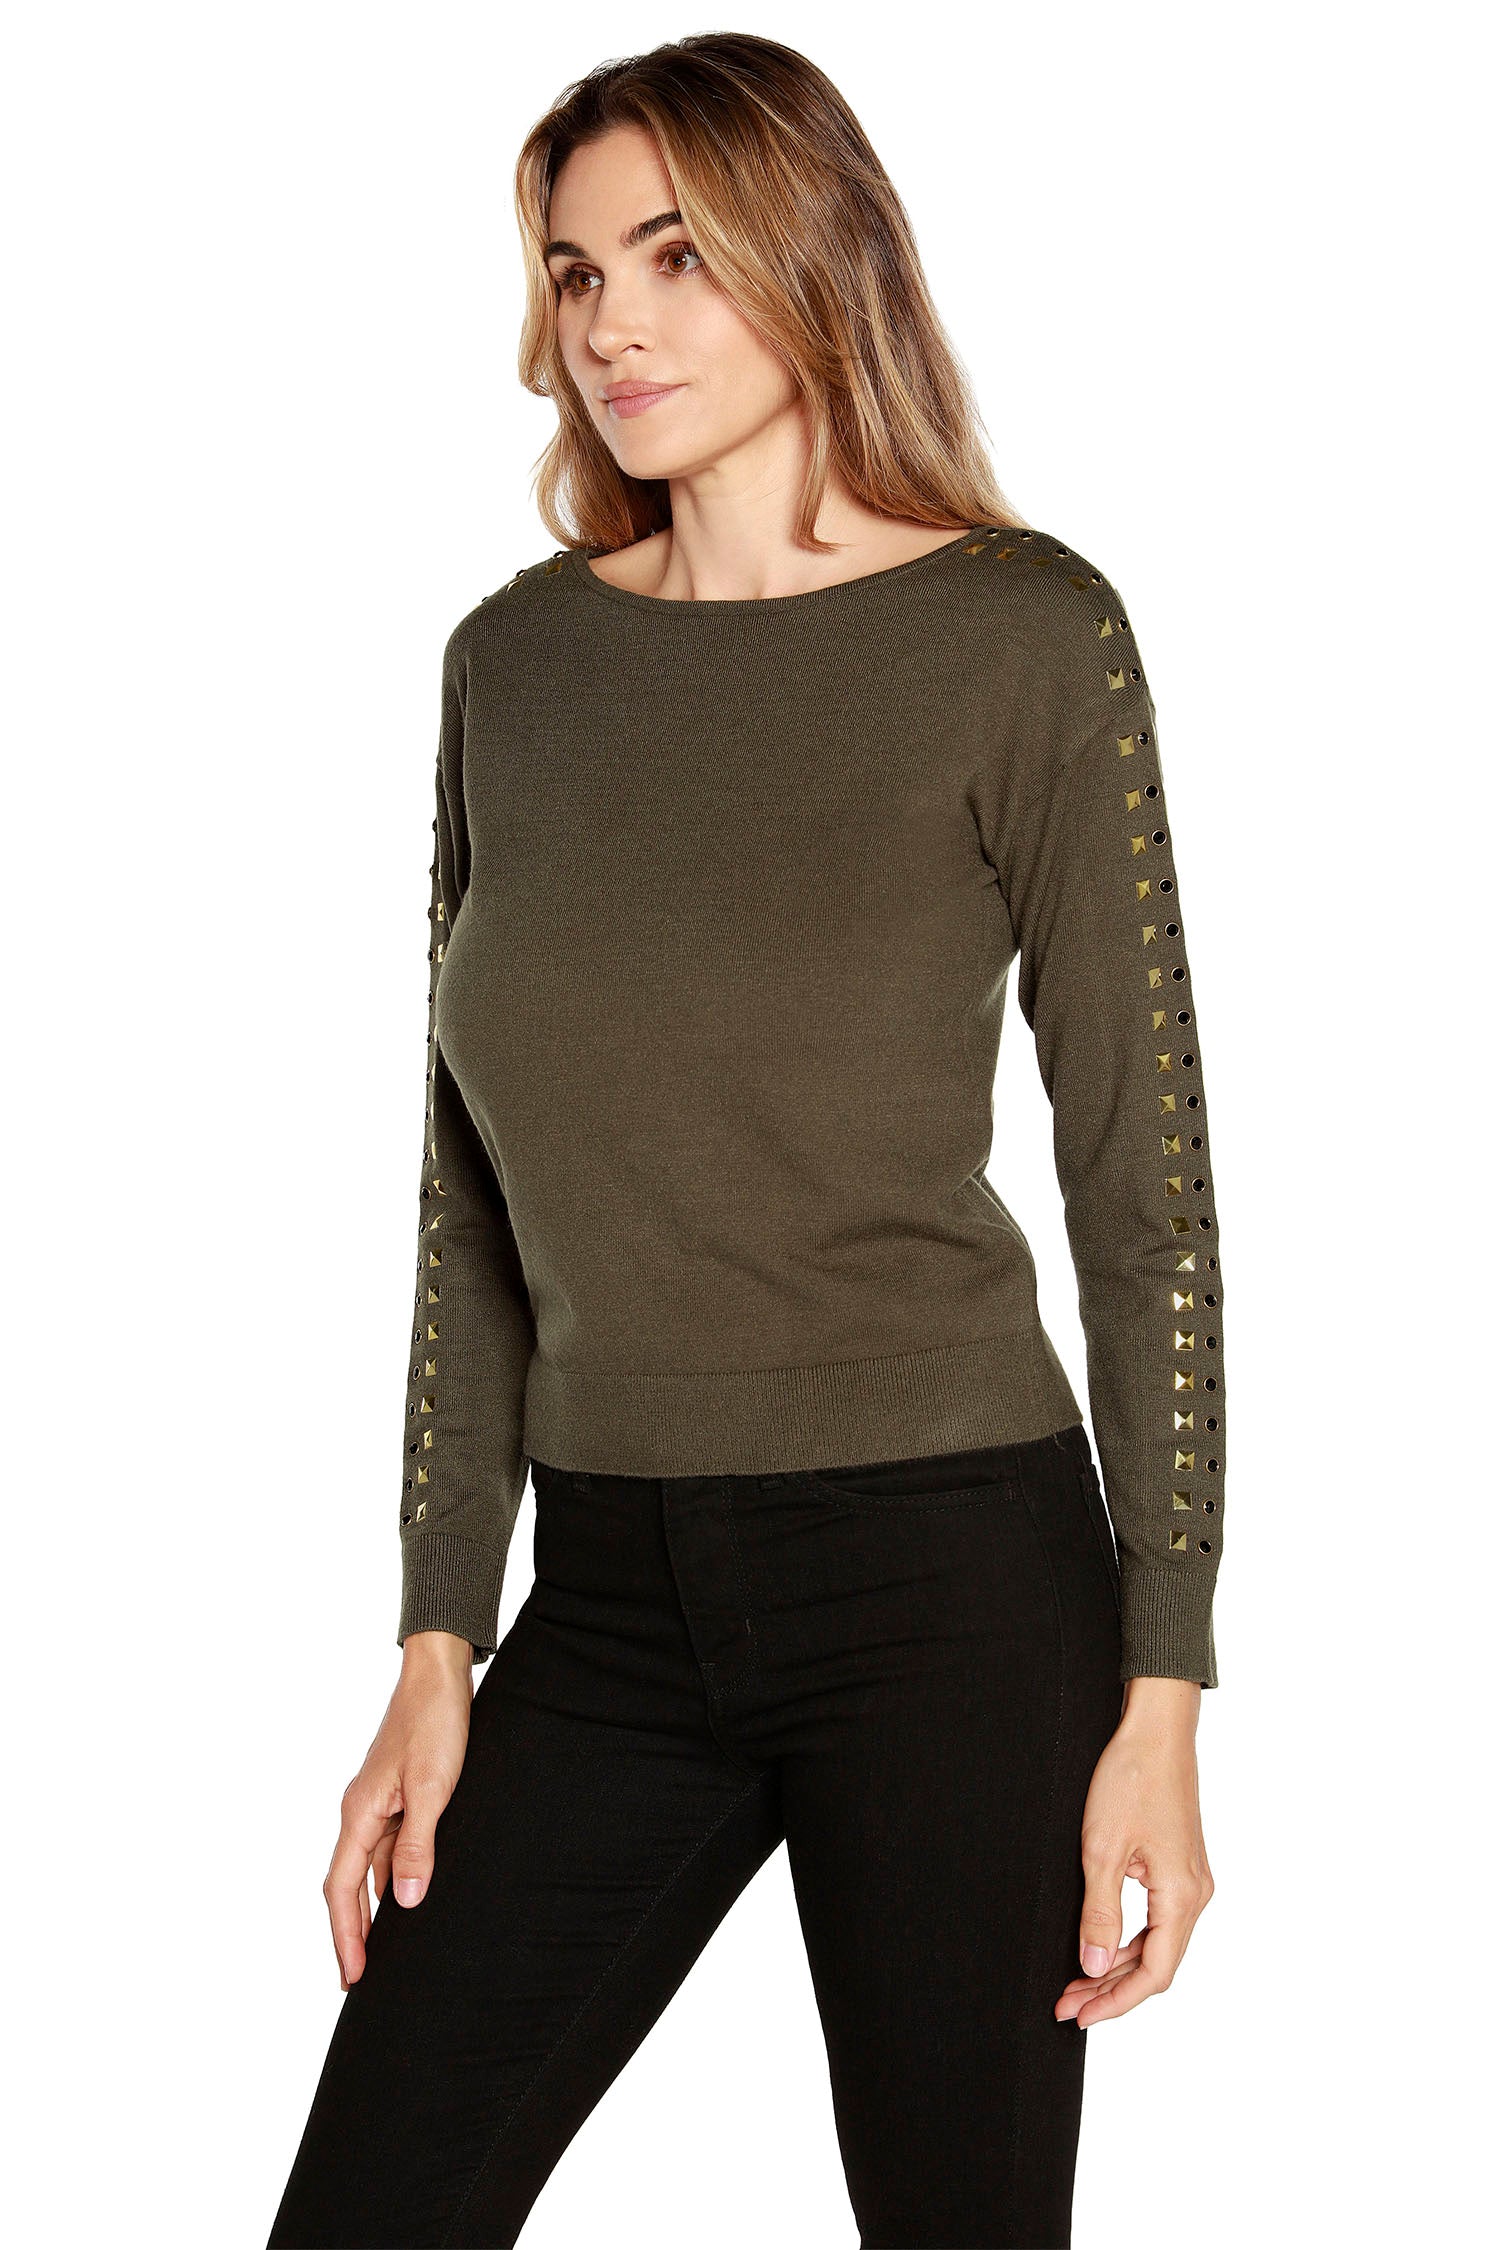 Women’s Lightweight Boat Neck Sweater with Rhinestones and Studs